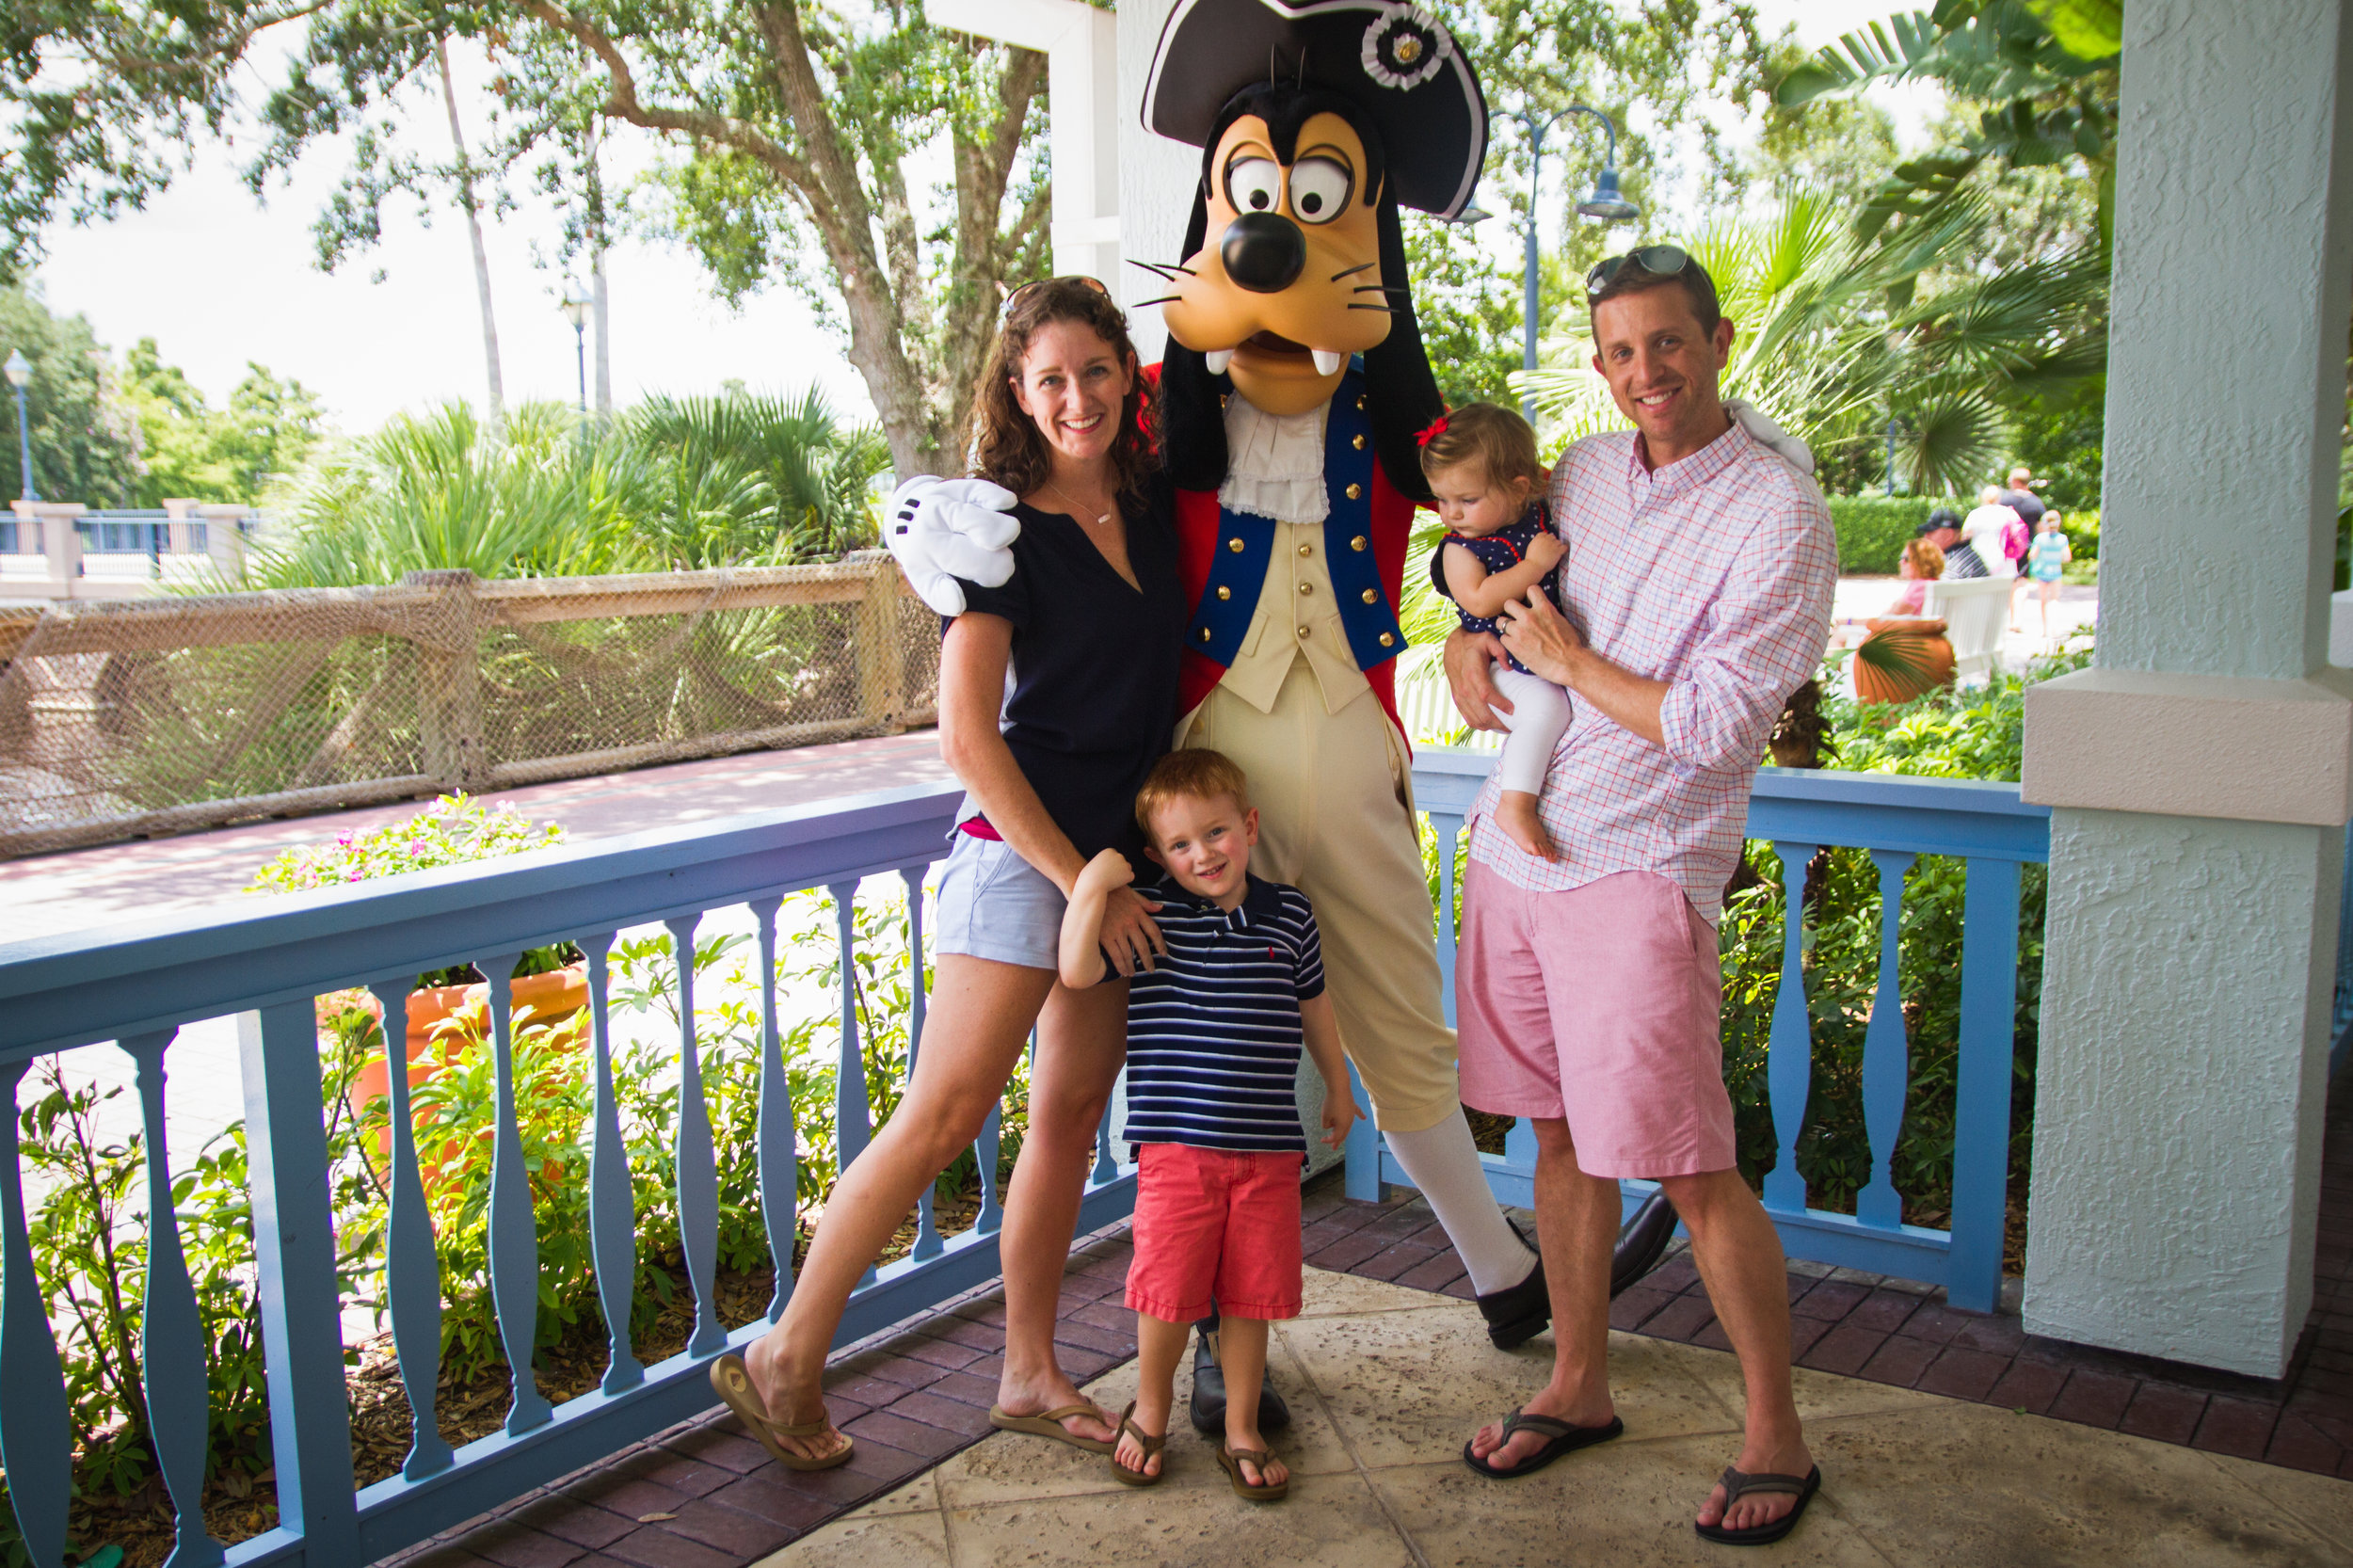 colonial goofy / character meet and greet / old key west resort